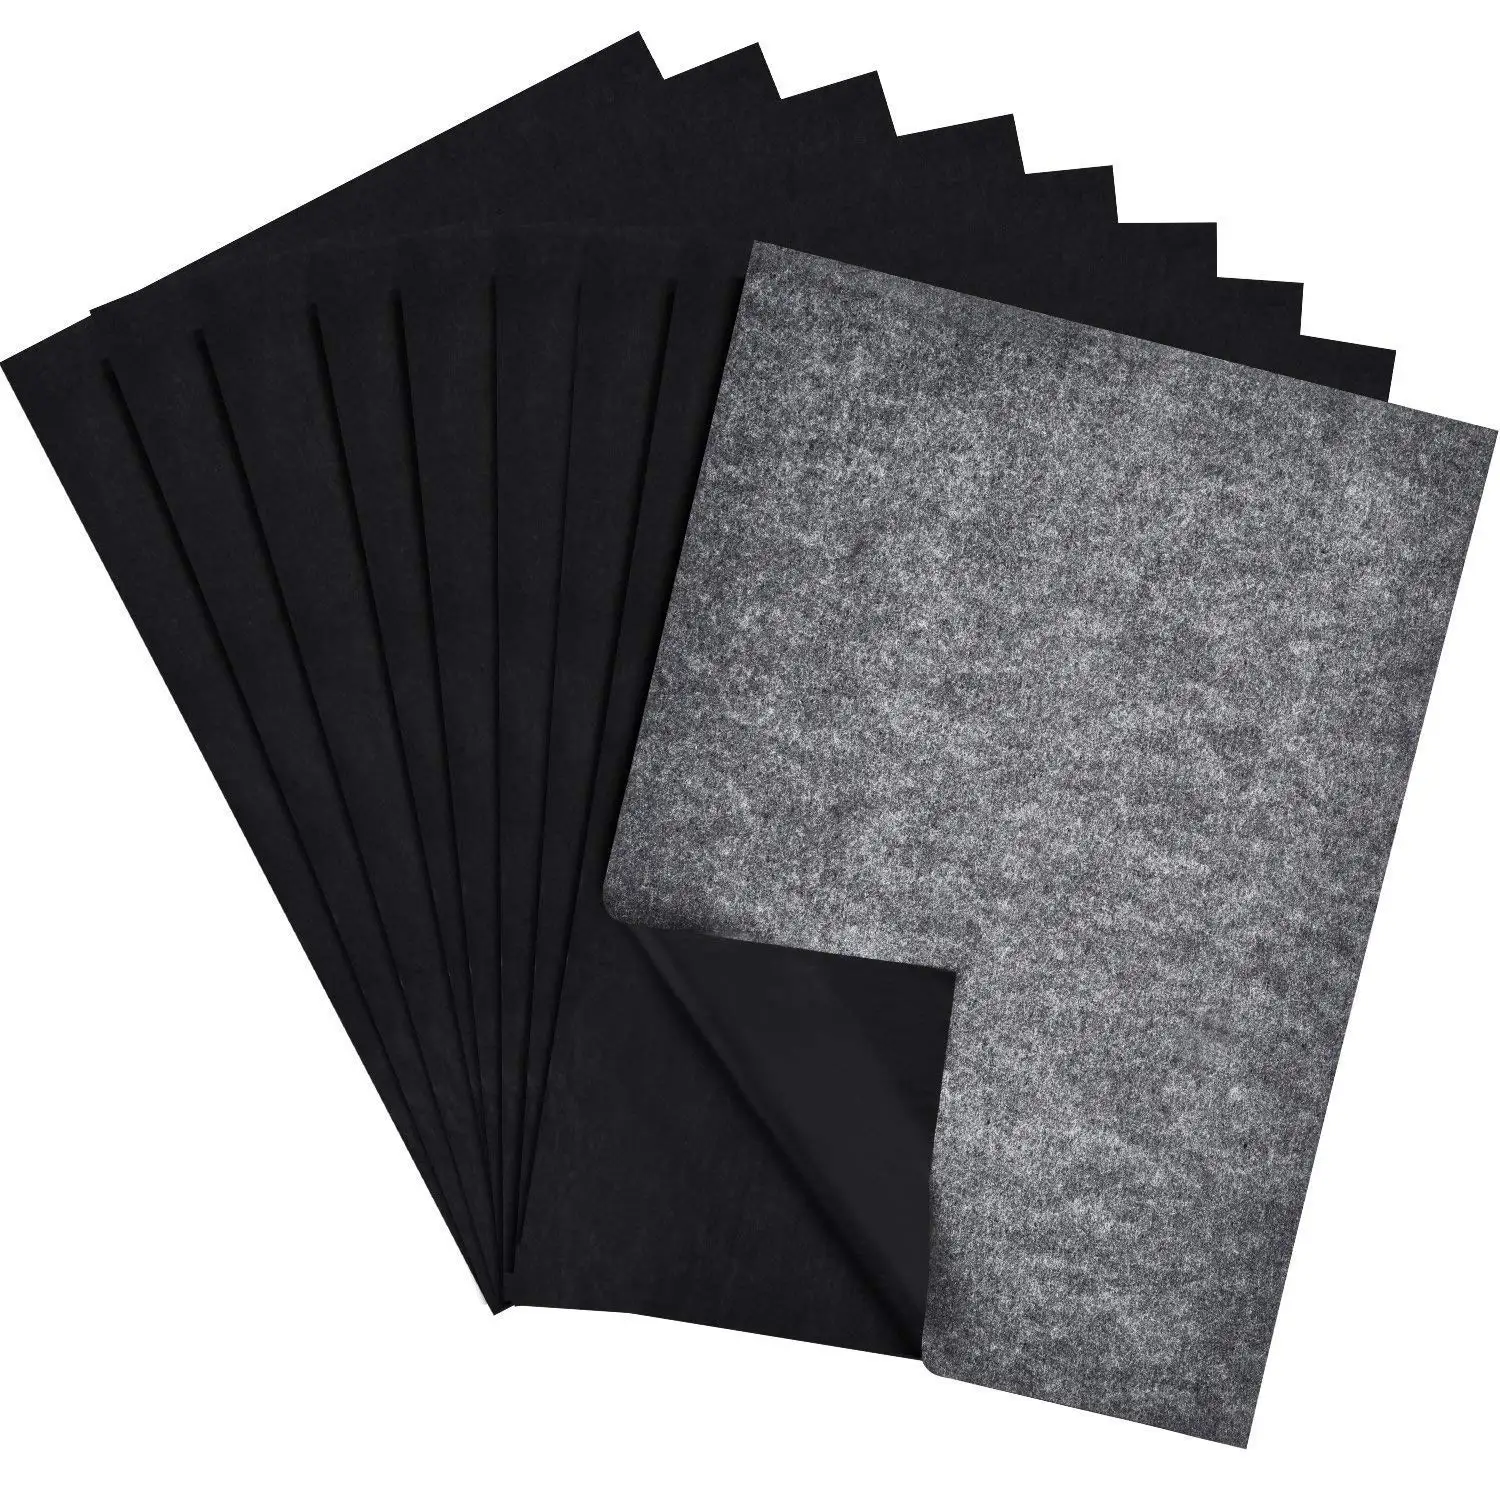 Cheap Carbon Paper Sheets Find Carbon Paper Sheets Deals On Line At Alibaba